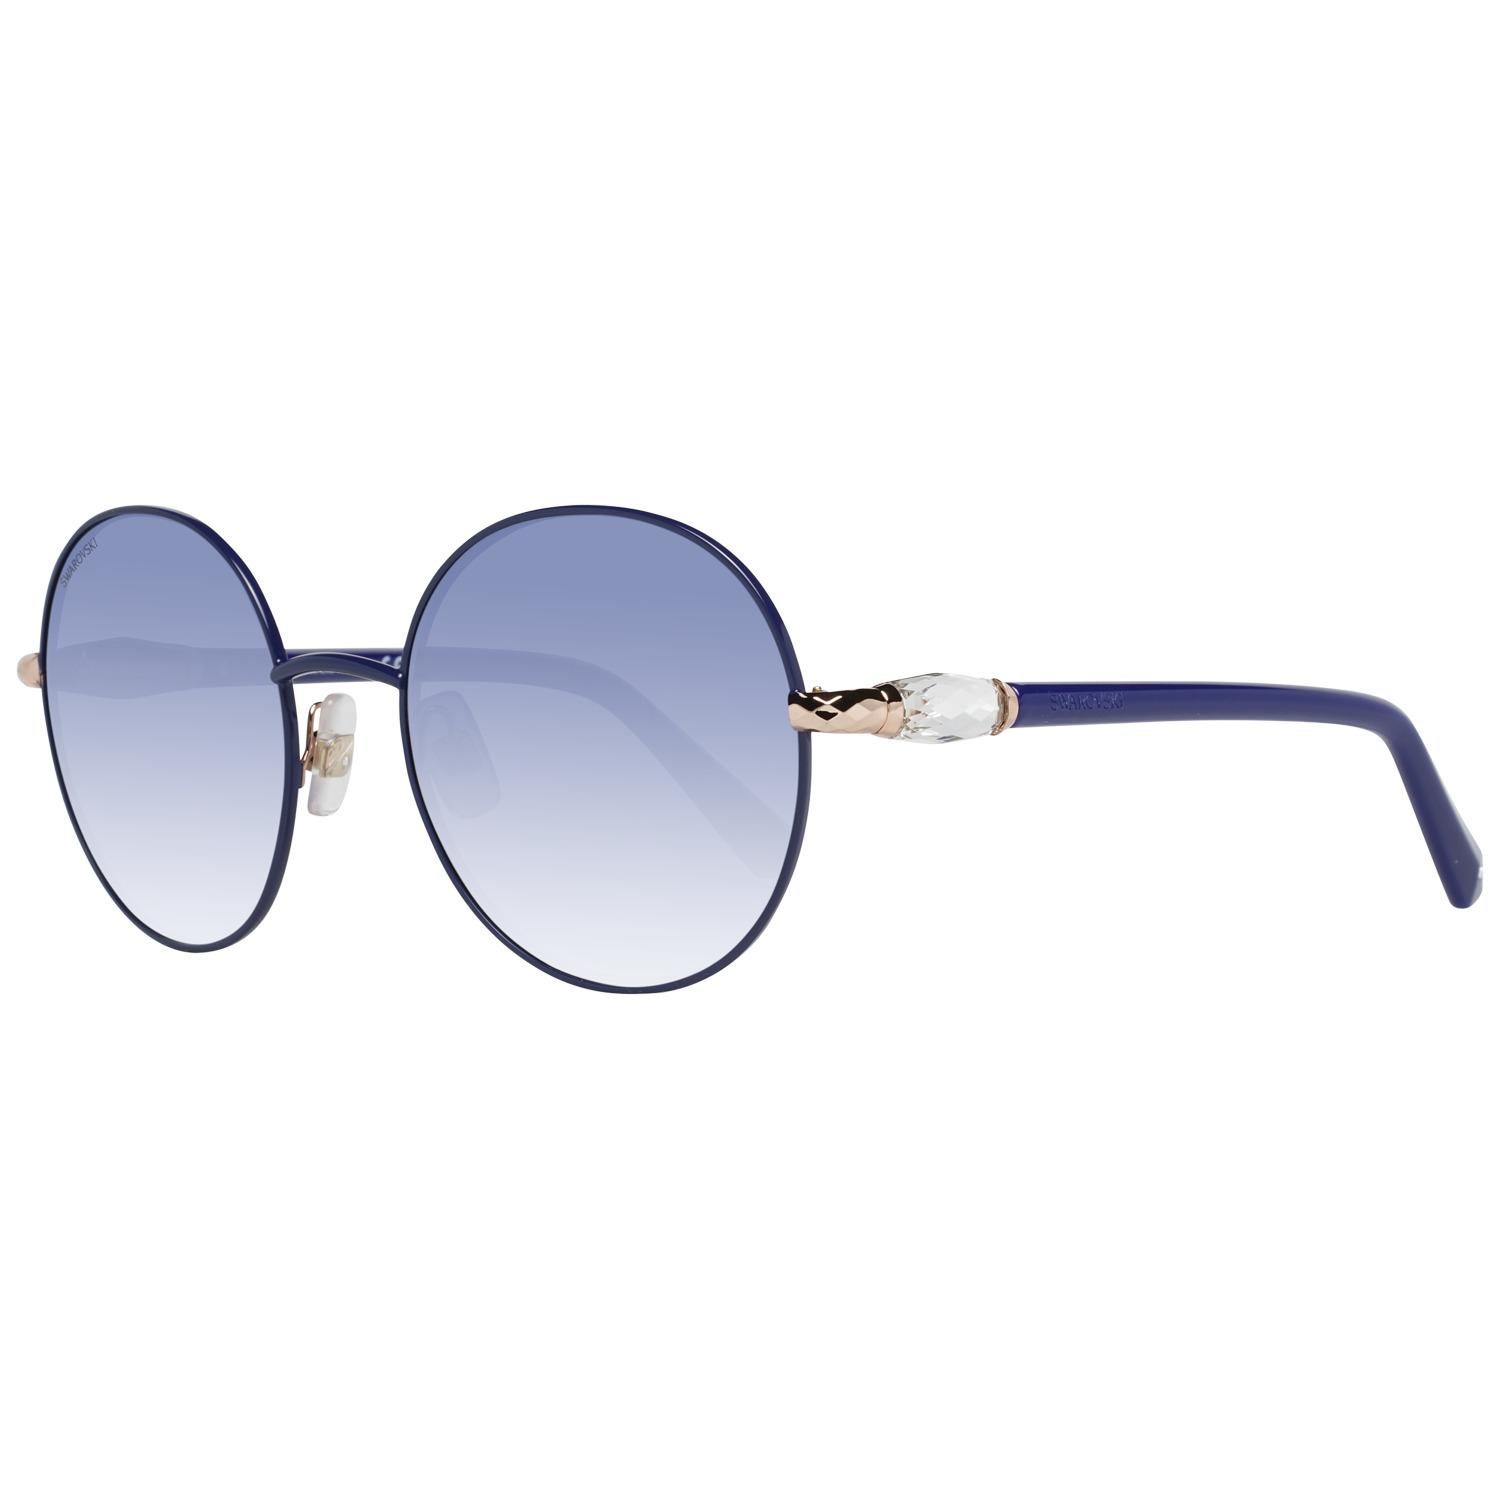 DetailsMATERIAL: MetalCOLOR: BlueMODEL: SK0260 5592XGENDER: WomenCOUNTRY OF MANUFACTURE: ChinaTYPE: SunglassesORIGINAL CASE?: YesSTYLE: RoundOCCASION: CasualFEATURES: LightweightLENS COLOR: BlueLENS TECHNOLOGY: MirroredYEAR MANUFACTURED: